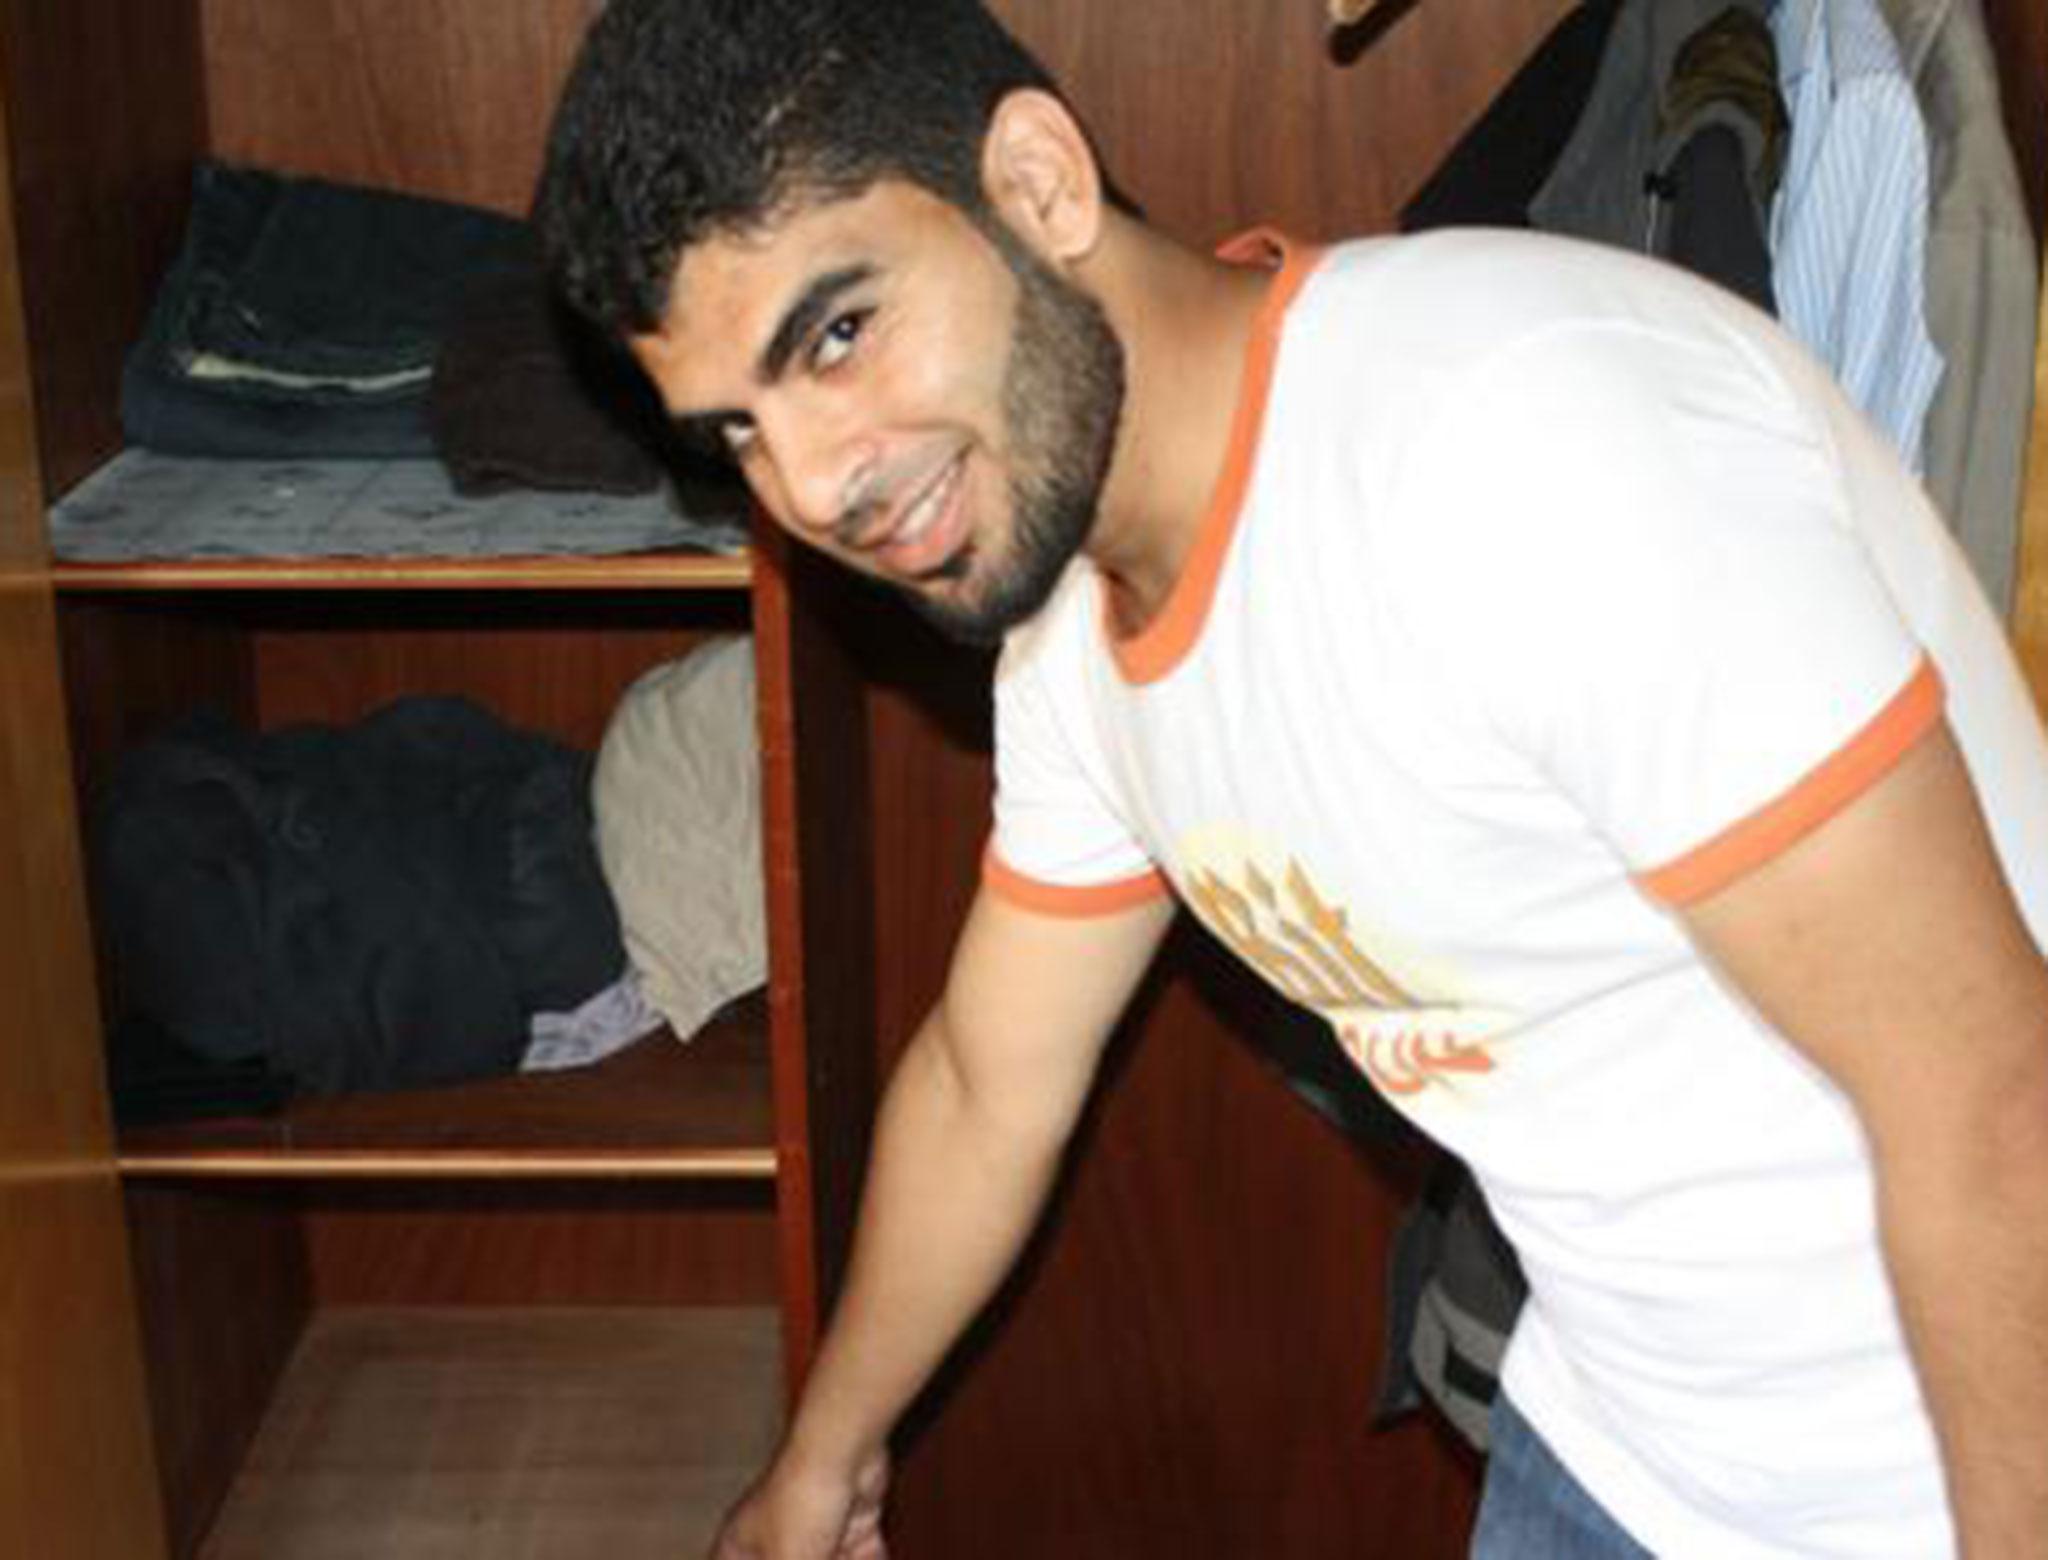 Mr Muhannad and the wardrobe where he found the money